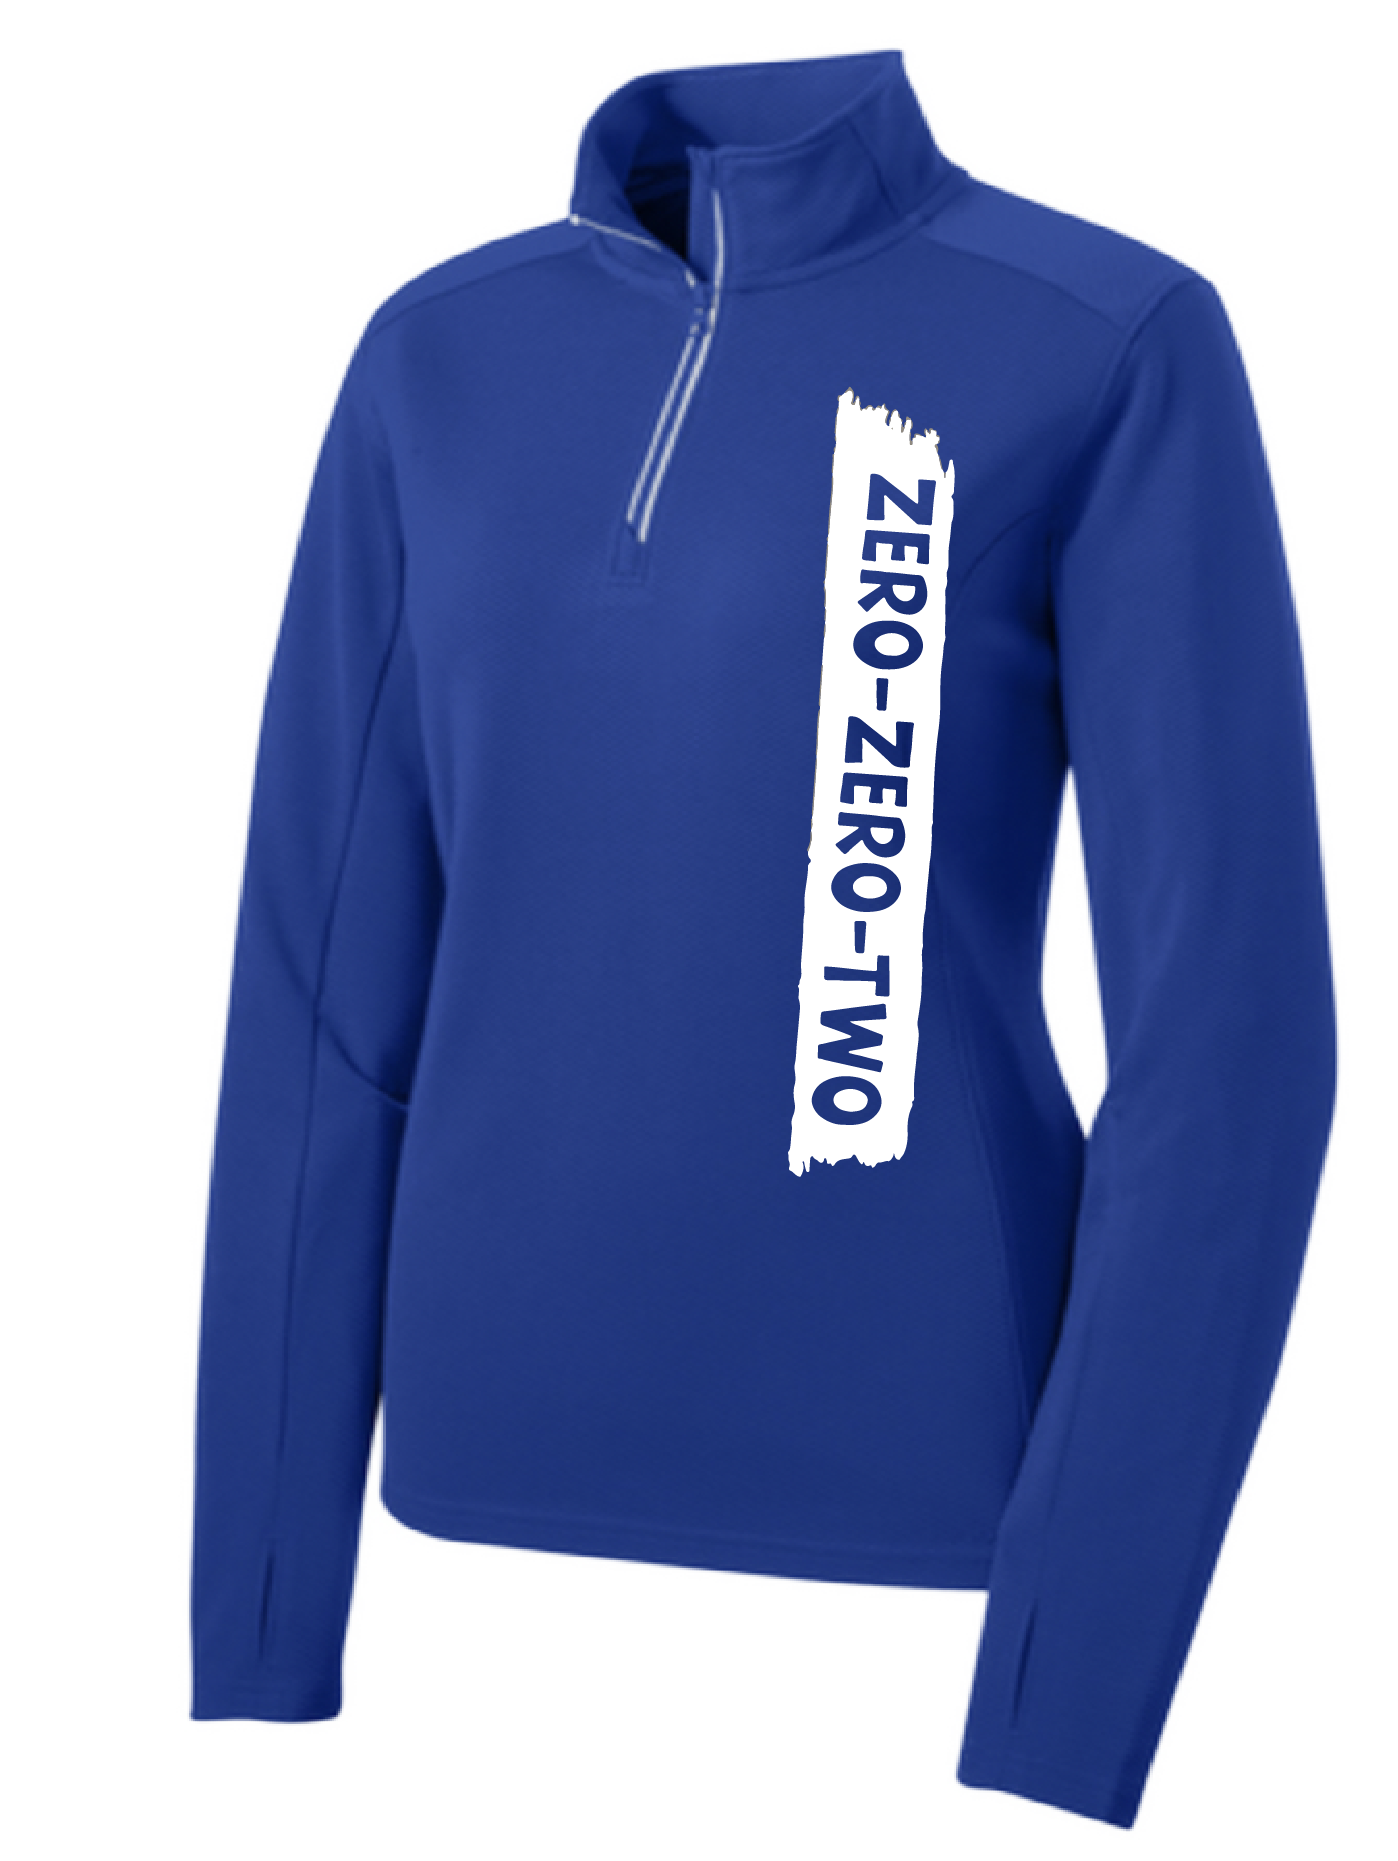 Pickleball Design: Zero Zero Two (Customizable Location)  Women's 1/4-Zip Pullover: Princess seams and drop tail hem.  Turn up the volume in this Women's shirt with its perfect mix of softness and attitude. Material is ultra-comfortable with moisture wicking properties and tri-blend softness. PosiCharge technology locks in color. Highly breathable and lightweight. Versatile enough for wearing year-round.